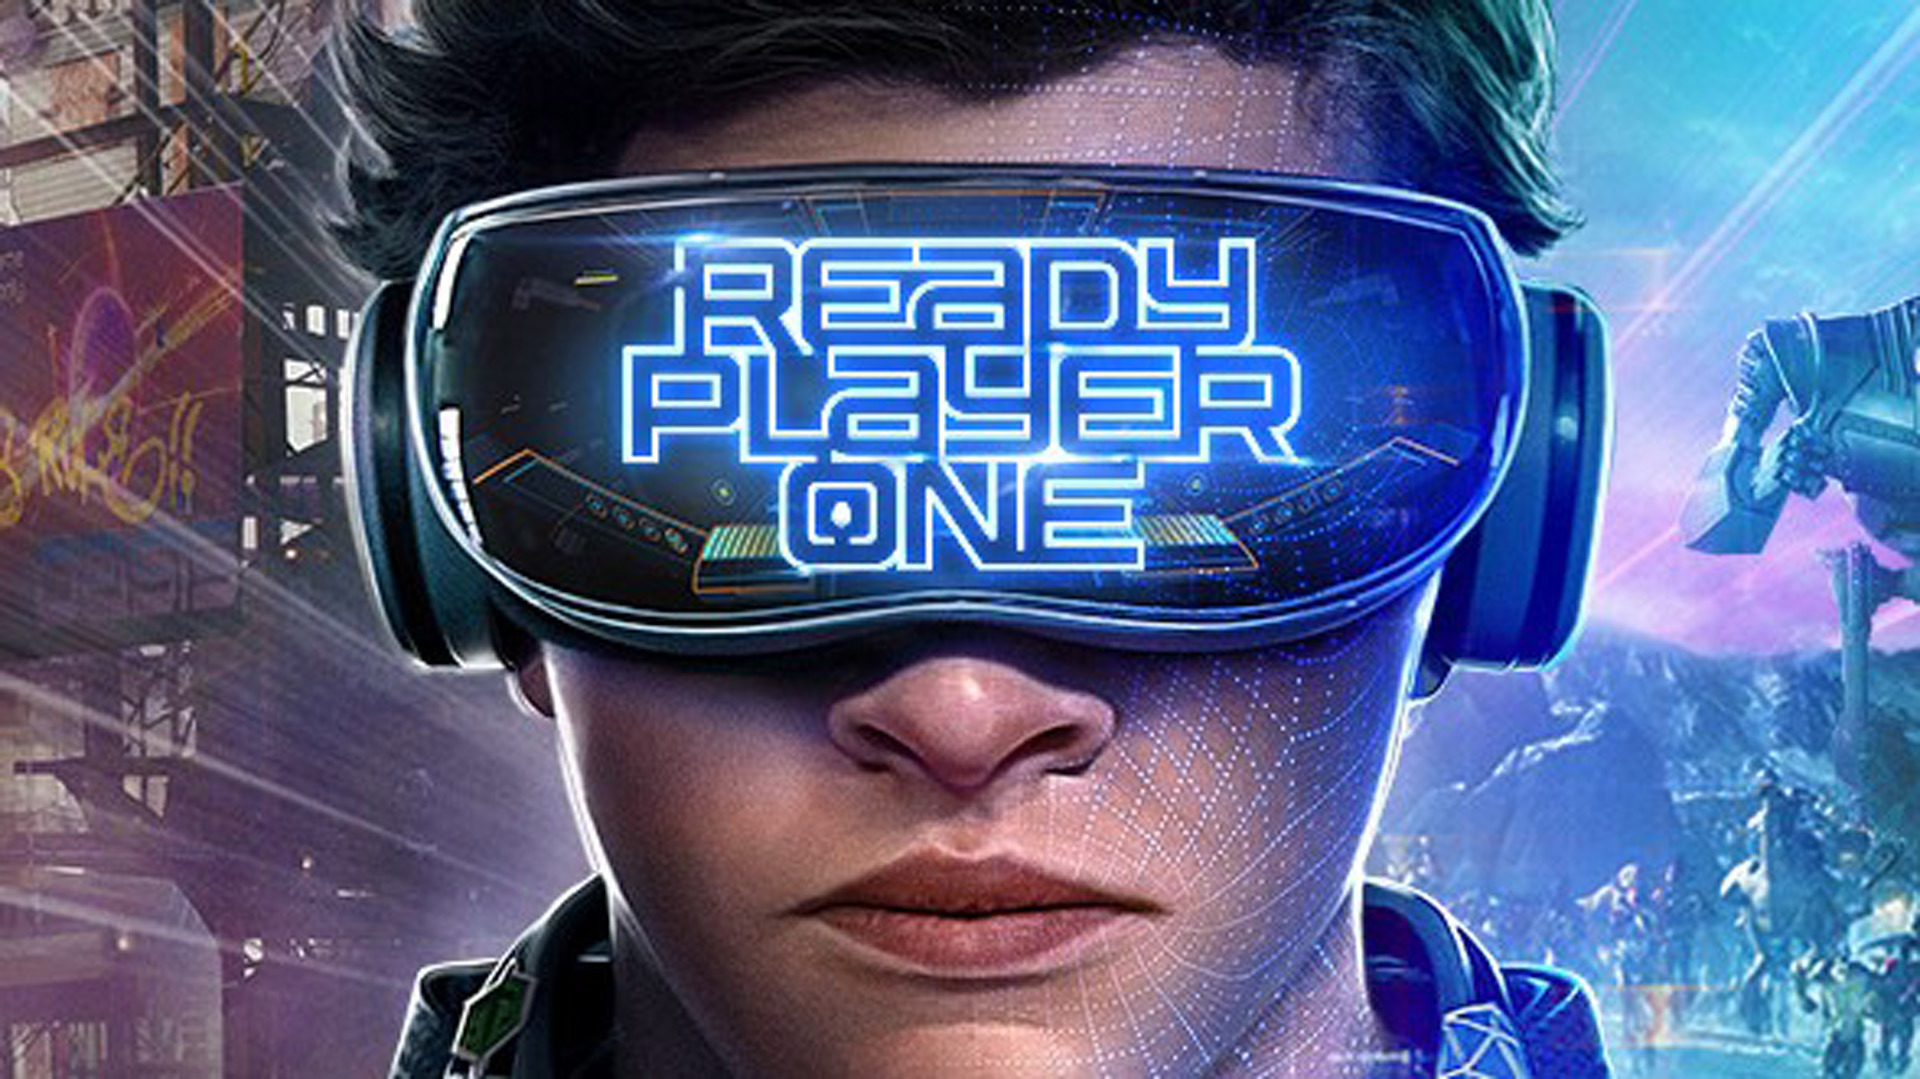 jury Stratford på Avon Udpakning HTC Releases 3 'Ready Player One' VR Experiences in 'OASIS Beta', Now Free  on Viveport – Road to VR